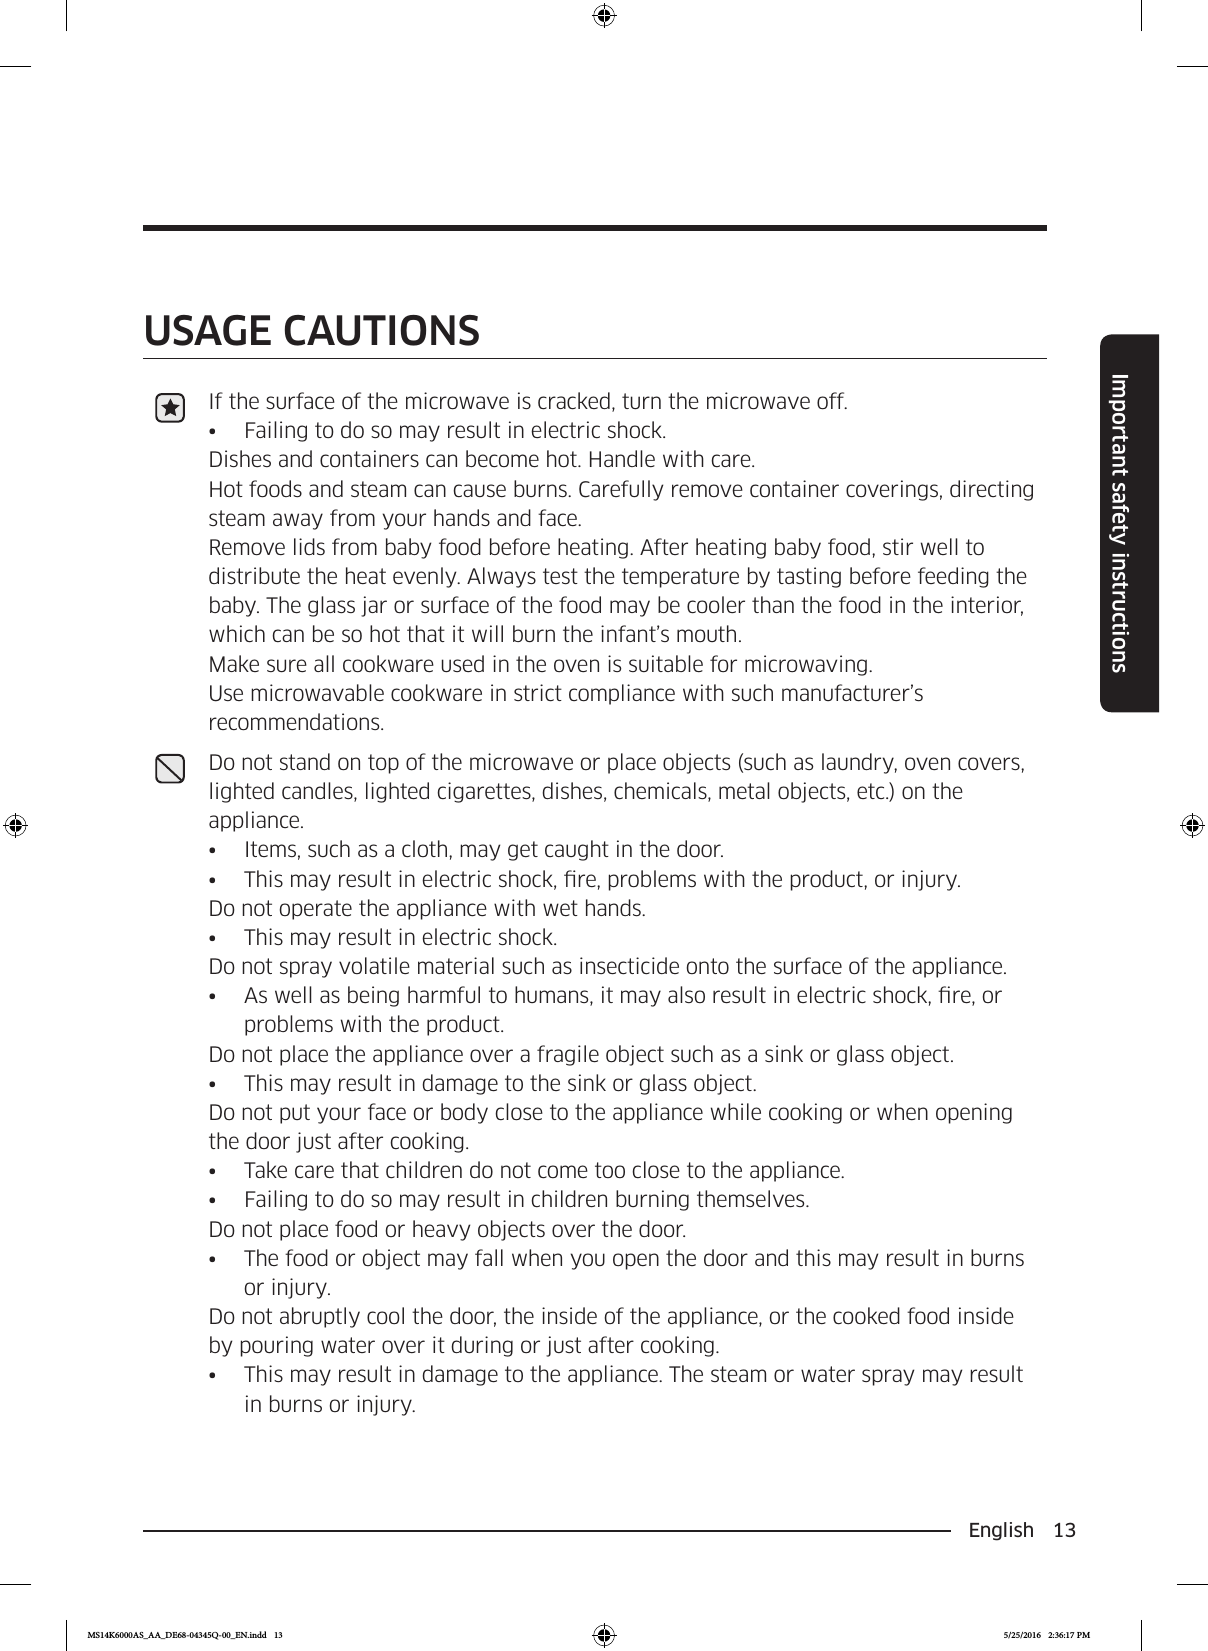 English 13Important safety instructionsSAVE THESE INSTRUCTIONSSAVE THESE INSTRUCTIONSUSAGE CAUTIONSIf the surface of the microwave is cracked, turn the microwave off.•  Failing to do so may result in electric shock.Dishes and containers can become hot. Handle with care. Hot foods and steam can cause burns. Carefully remove container coverings, directing steam away from your hands and face.Remove lids from baby food before heating. After heating baby food, stir well to distribute the heat evenly. Always test the temperature by tasting before feeding the baby. The glass jar or surface of the food may be cooler than the food in the interior, which can be so hot that it will burn the infant’s mouth.Make sure all cookware used in the oven is suitable for microwaving.Use microwavable cookware in strict compliance with such manufacturer’s recommendations.Do not stand on top of the microwave or place objects (such as laundry, oven covers, lighted candles, lighted cigarettes, dishes, chemicals, metal objects, etc.) on the appliance.•  Items, such as a cloth, may get caught in the door.•  This may result in electric shock, re, problems with the product, or injury.Do not operate the appliance with wet hands.•  This may result in electric shock. Do not spray volatile material such as insecticide onto the surface of the appliance.•  As well as being harmful to humans, it may also result in electric shock, re, or problems with the product. Do not place the appliance over a fragile object such as a sink or glass object. •  This may result in damage to the sink or glass object.Do not put your face or body close to the appliance while cooking or when opening the door just after cooking.•  Take care that children do not come too close to the appliance.•  Failing to do so may result in children burning themselves.Do not place food or heavy objects over the door.•  The food or object may fall when you open the door and this may result in burns or injury. Do not abruptly cool the door, the inside of the appliance, or the cooked food inside by pouring water over it during or just after cooking.•  This may result in damage to the appliance. The steam or water spray may result in burns or injury.MS14K6000AS_AA_DE68-04345Q-00_EN.indd   13 5/25/2016   2:36:17 PM